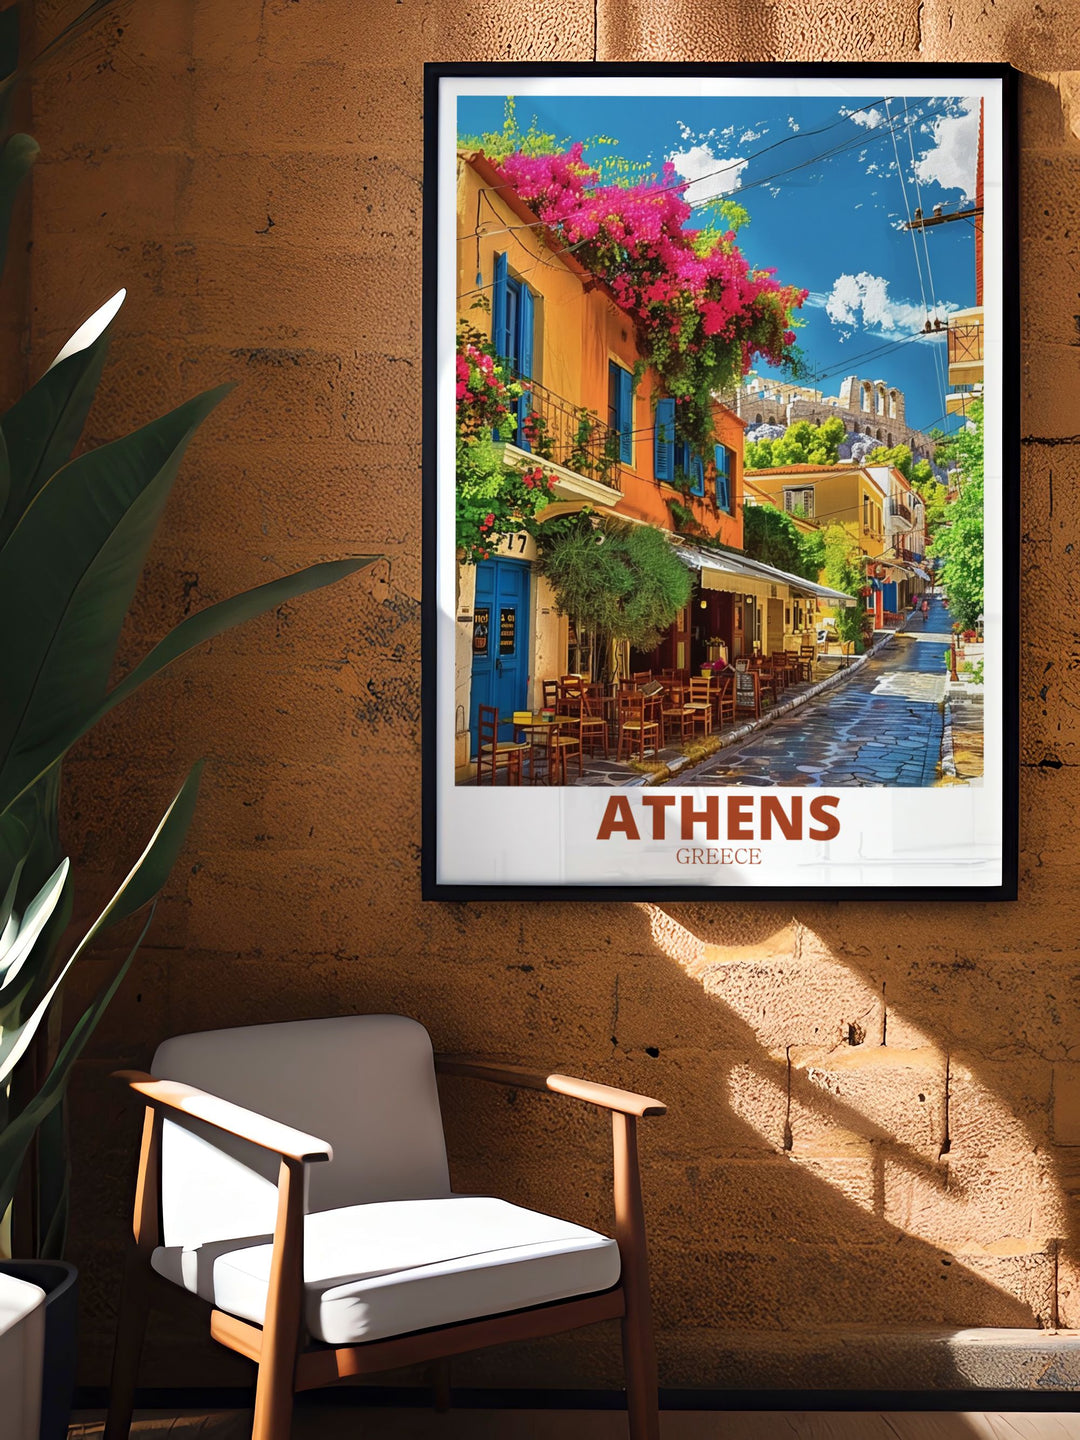 Athens Art Print featuring PlakaNeighborhood an ideal piece for traveler gifts and home decor highlighting the beauty and culture of one of Athens most iconic neighborhoods